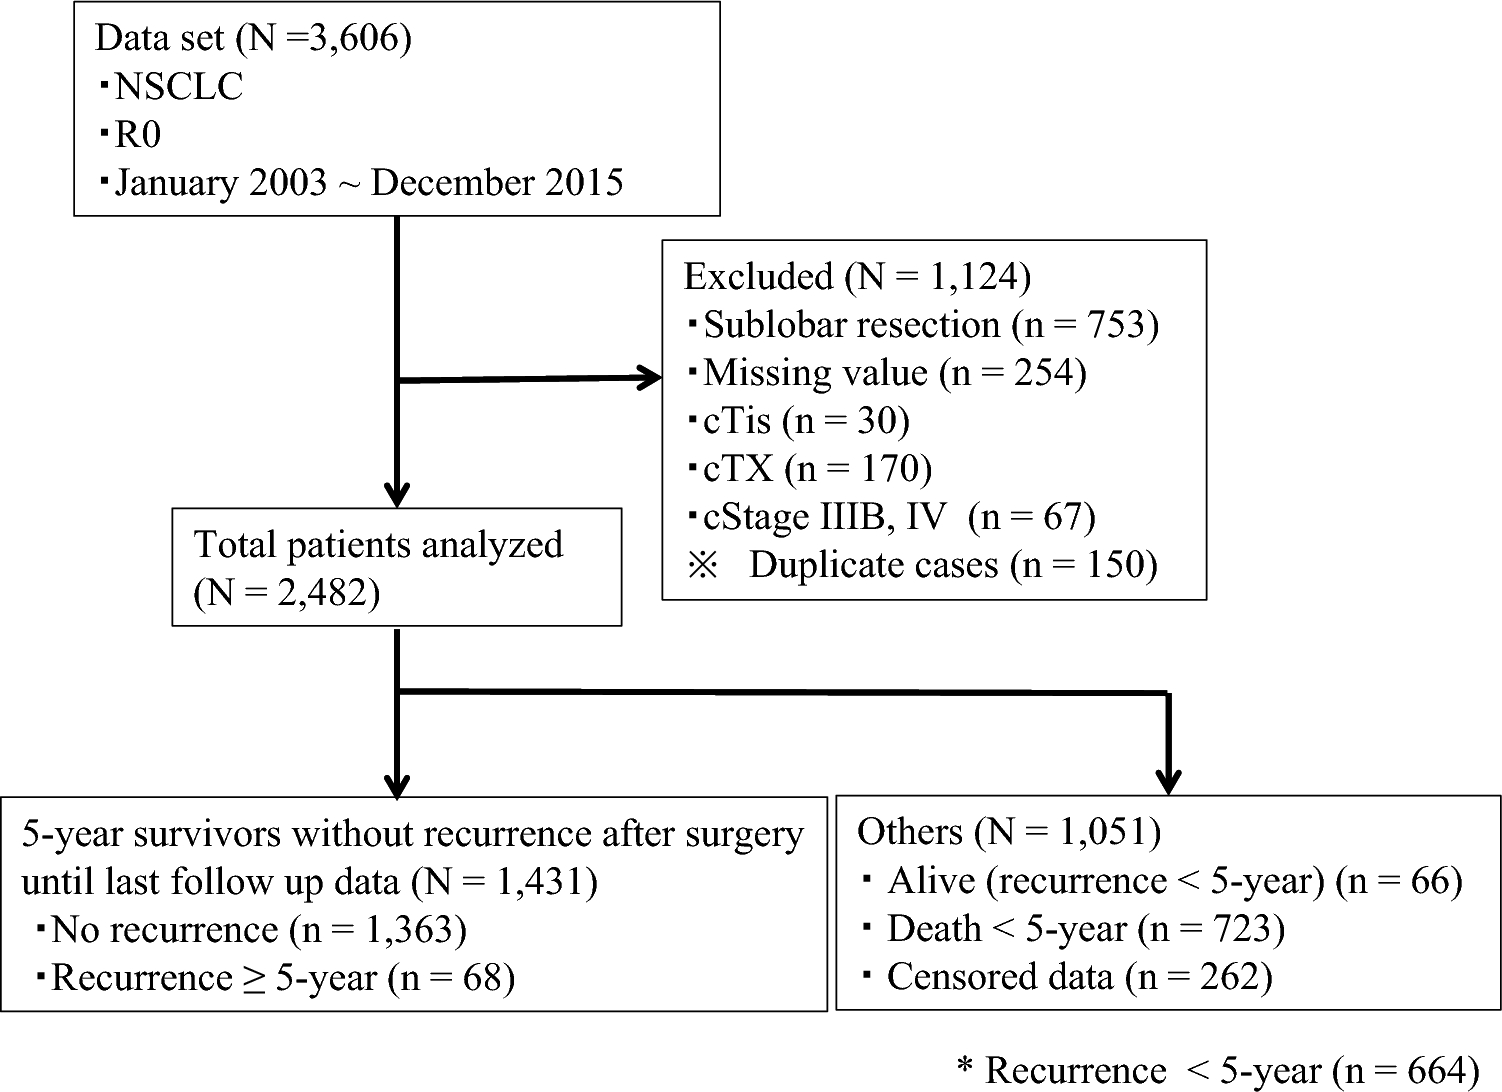 Long-term outcomes of 5-year survivors without recurrence after the complete resection of non-small cell lung cancer after lobectomy: a landmark analysis in consideration of competing risks